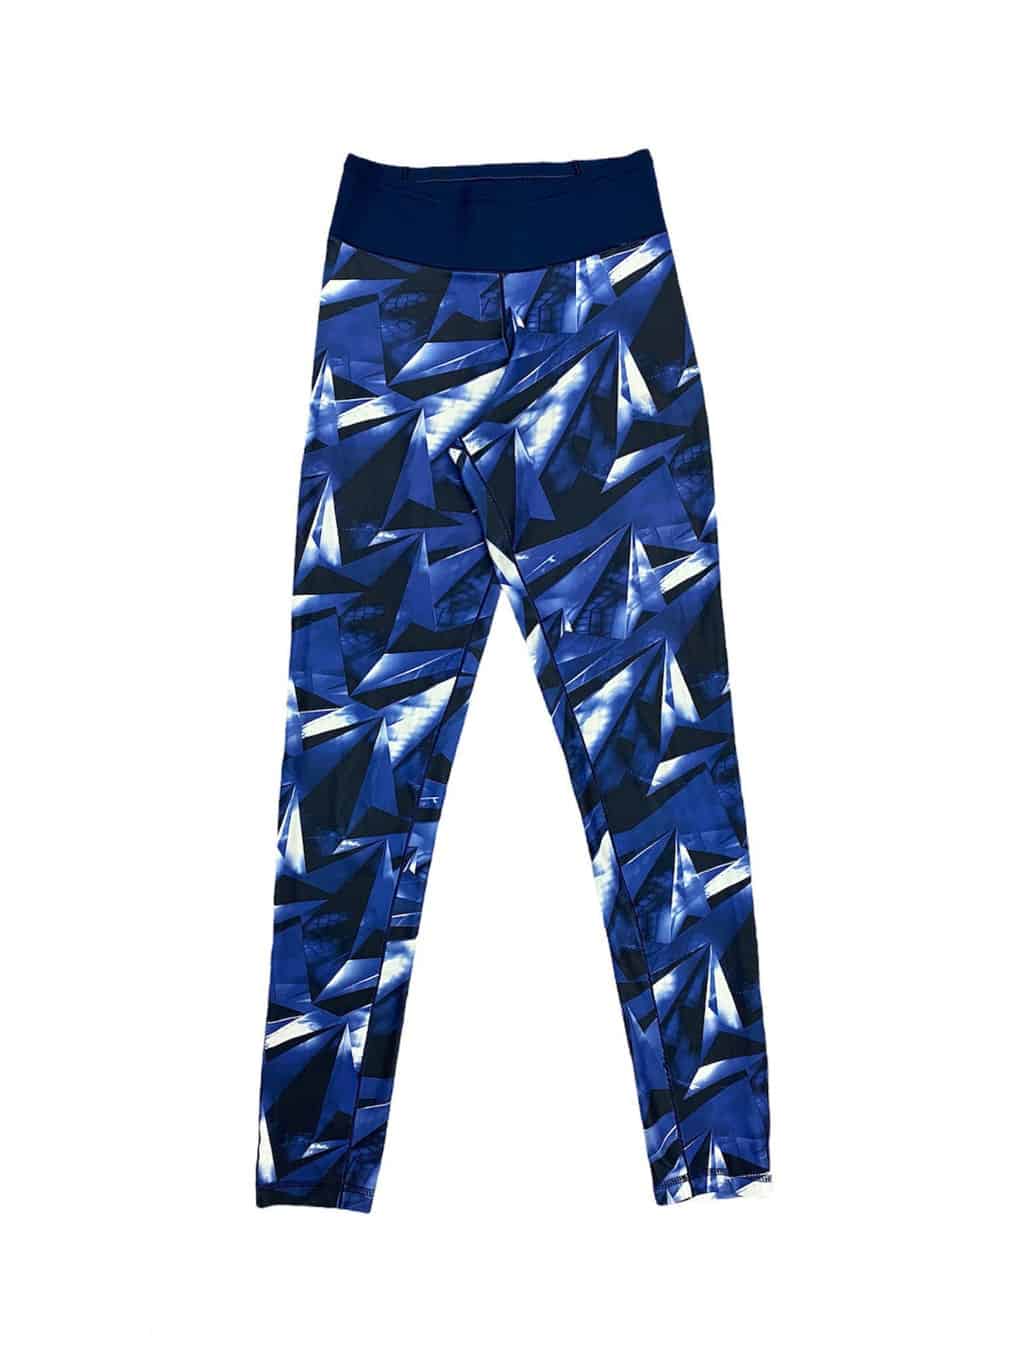 Women's Adidas Climalite Sports Leggings with Geometric Abstract